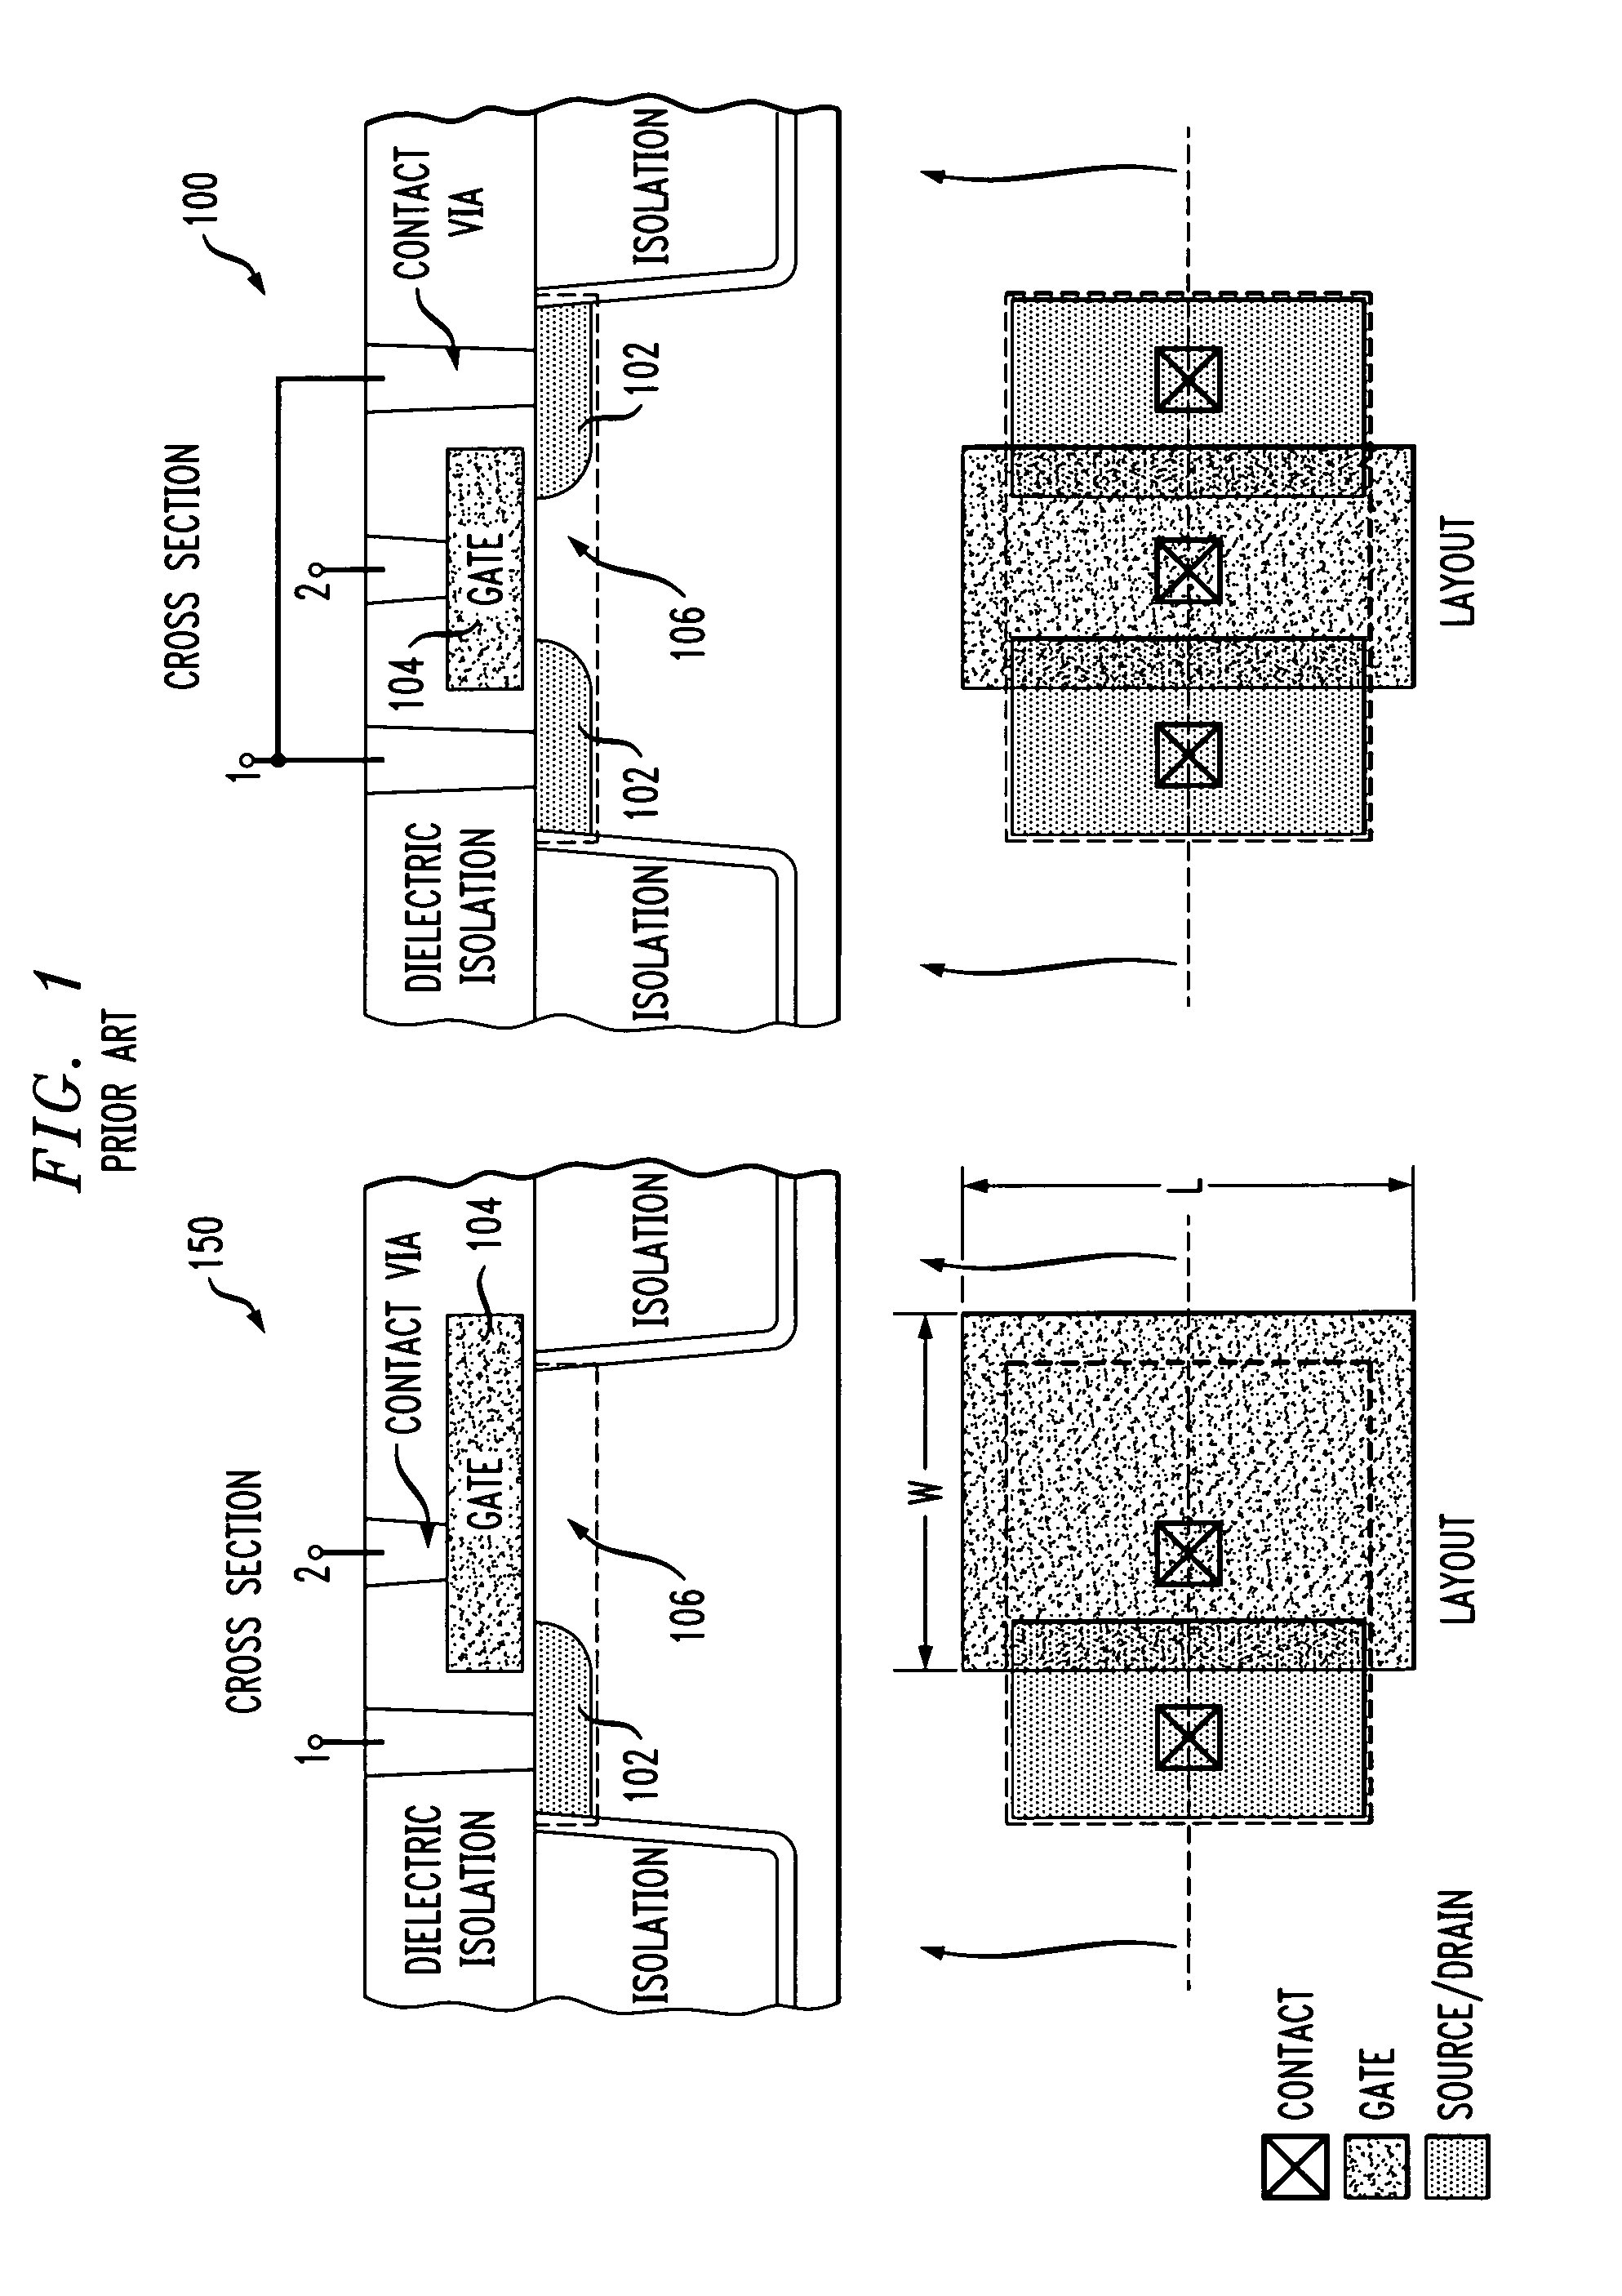 Area-efficient gated diode structure and method of forming same